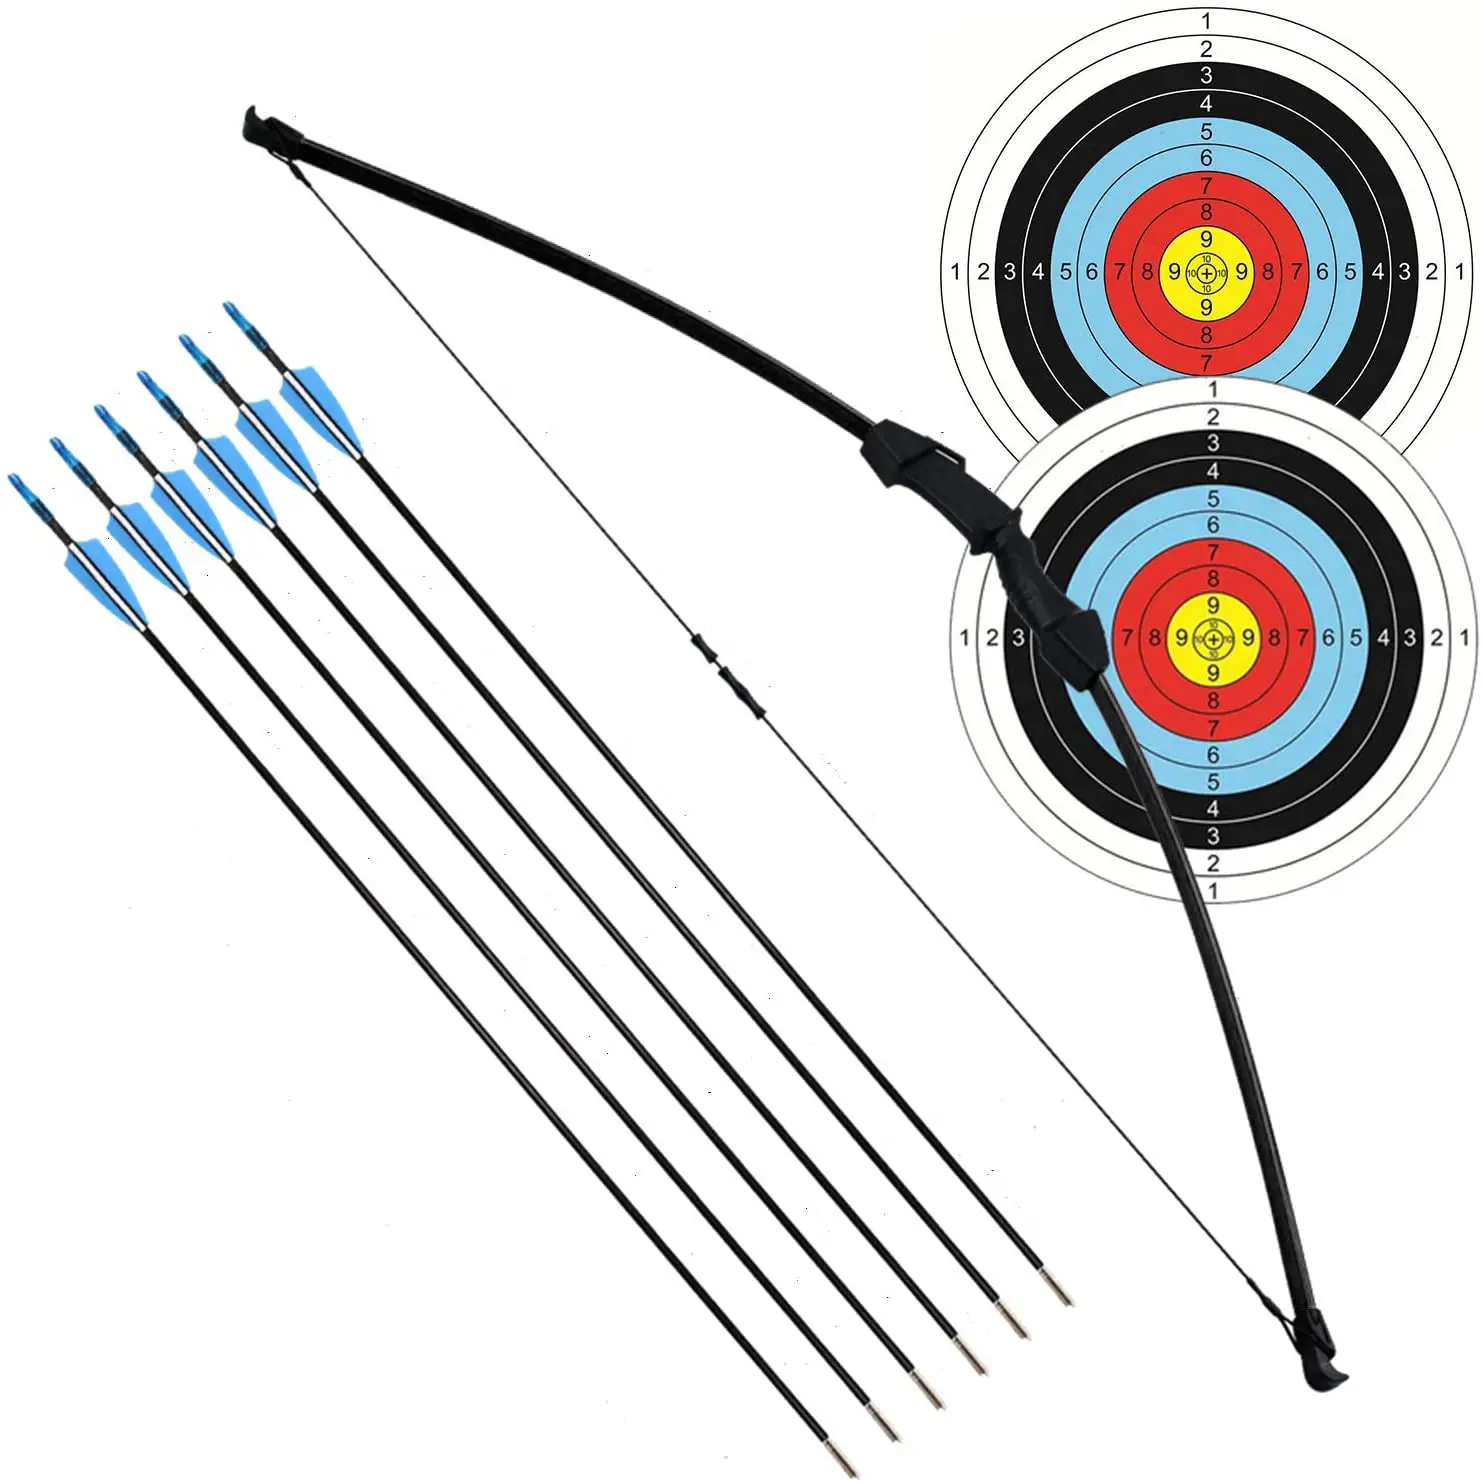 

45" Children's Recurve Bow And Arrow Set Archery Red Limbs for Youth Beginner Practice Shooting Right Left Hand with 6 Arrows